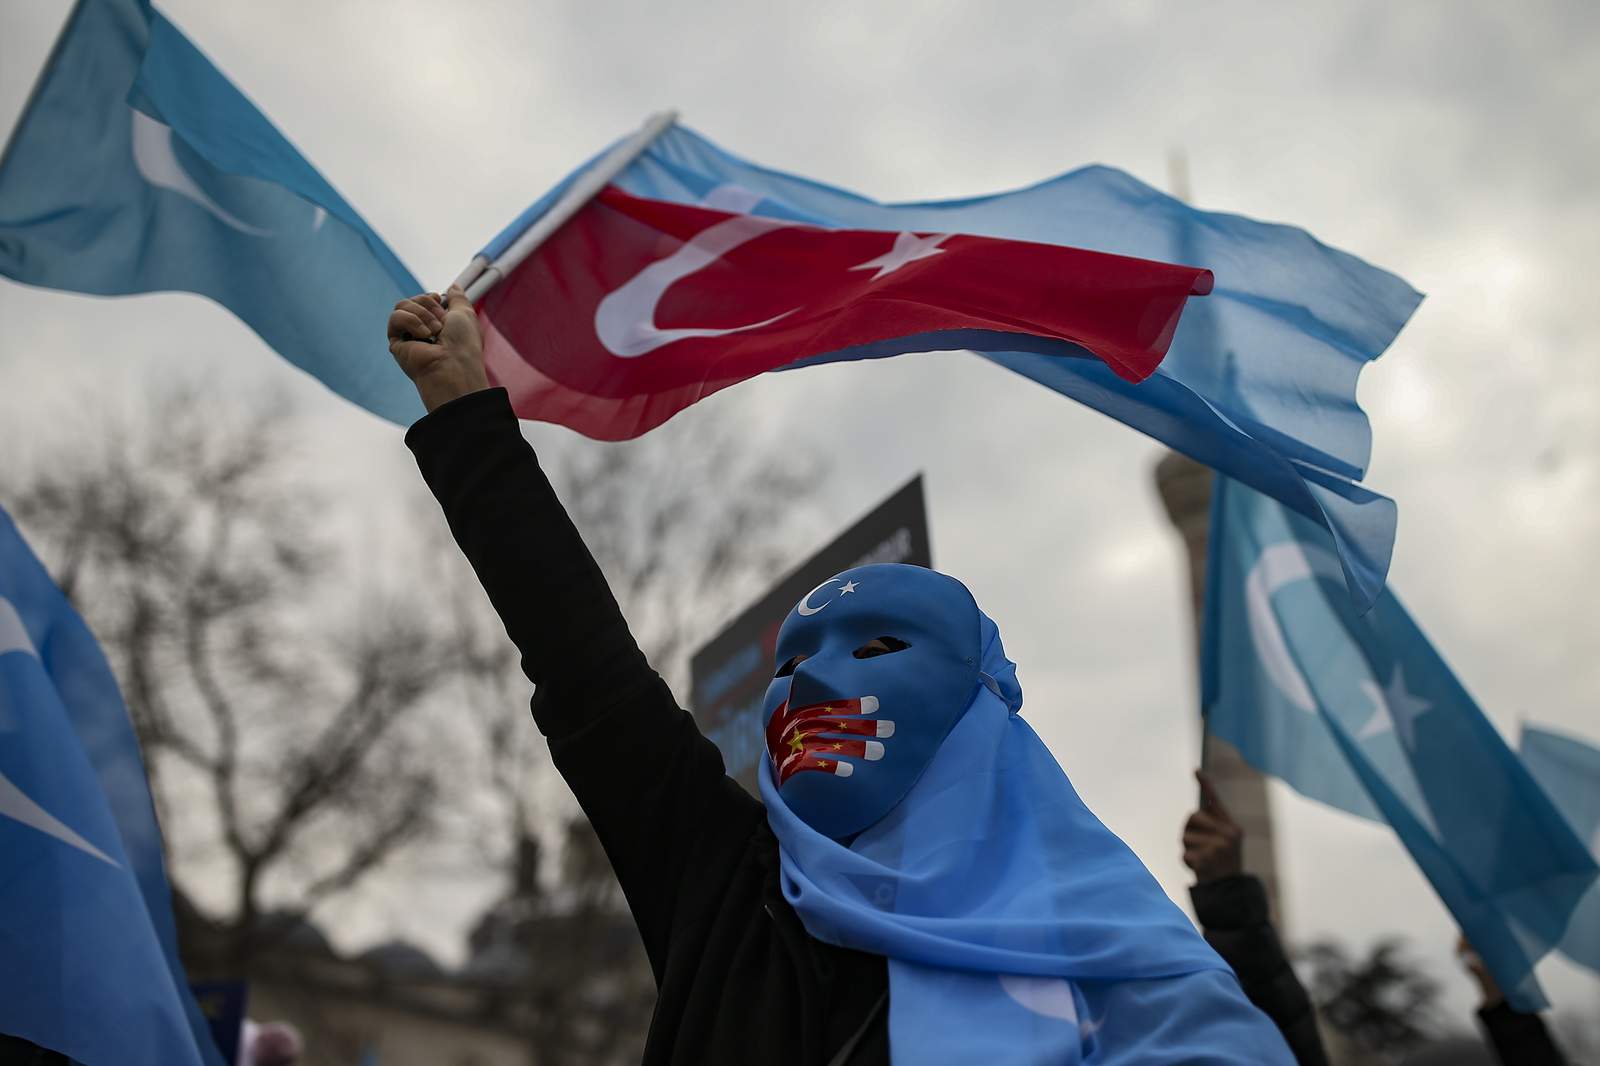 Uyghurs in Turkey protest Chinese foreign minister's visit